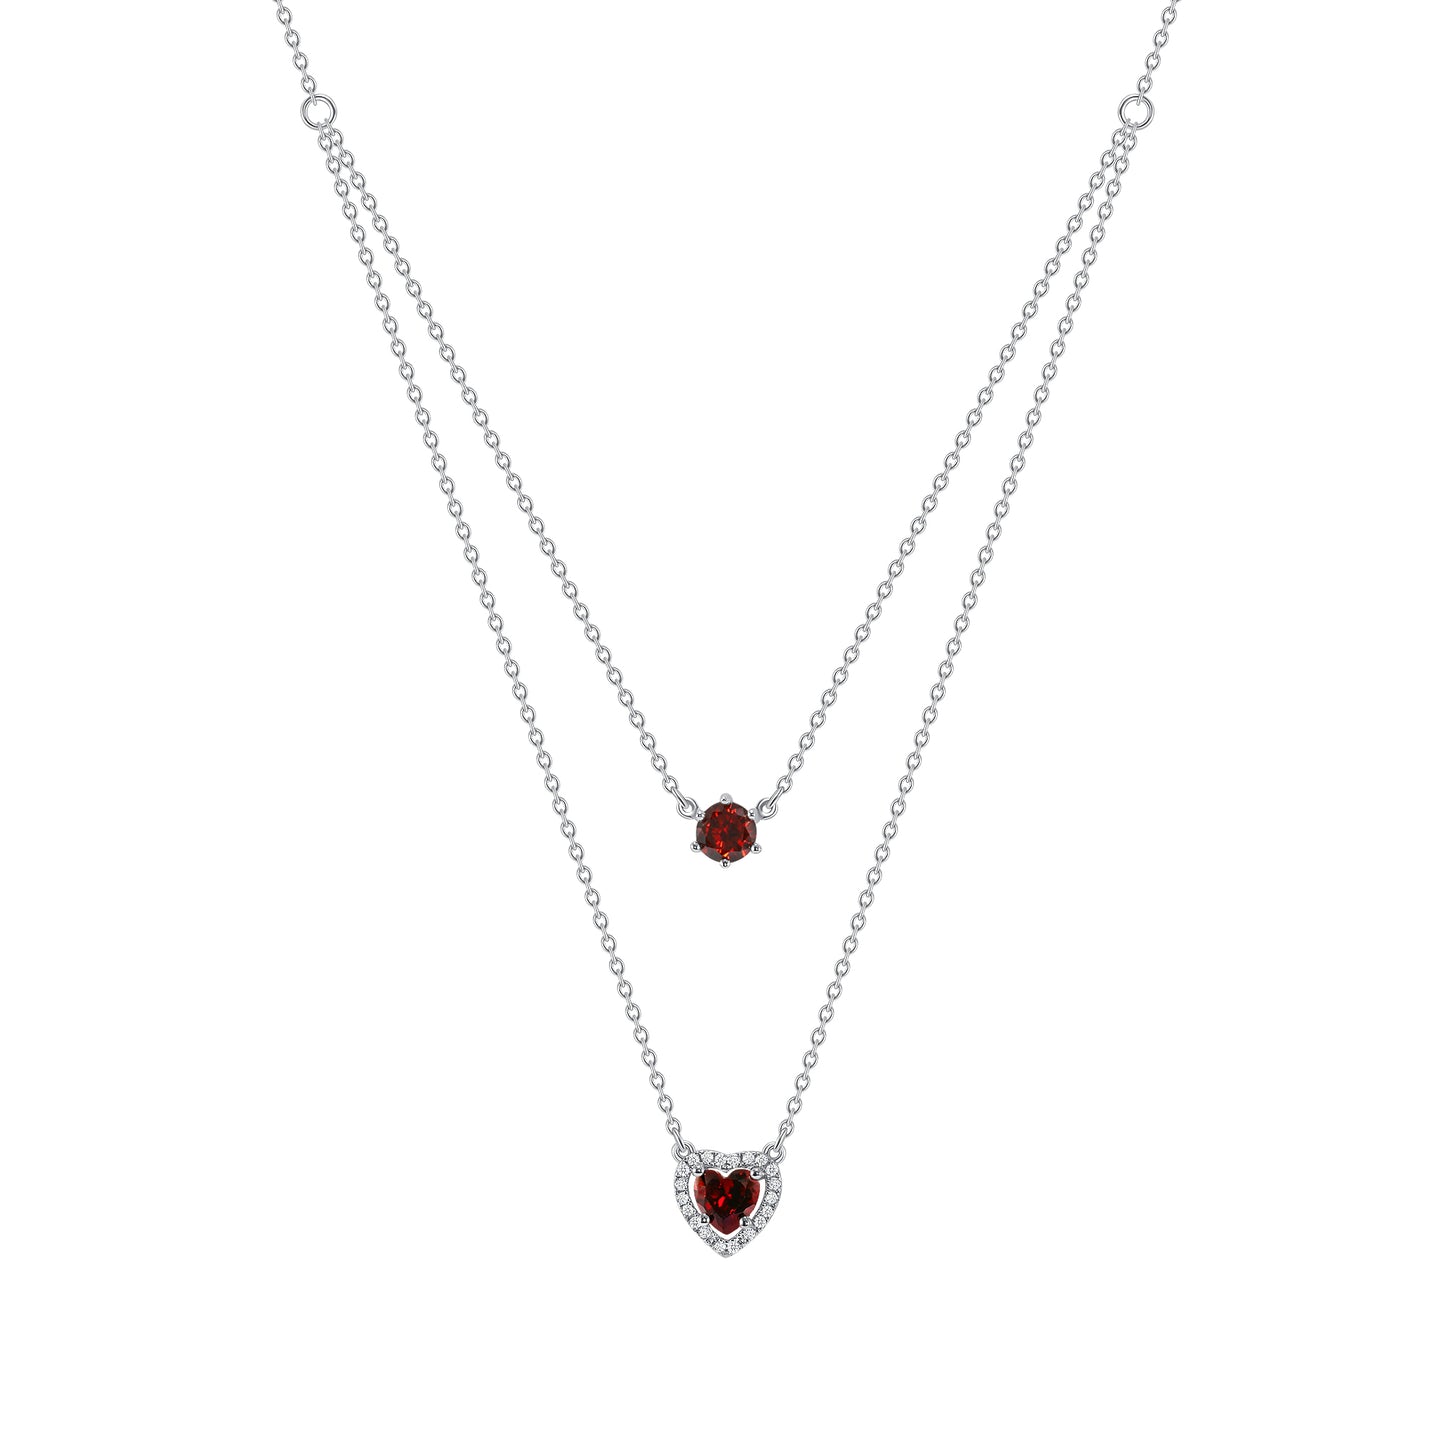 Silver 925 Rhodium Plated Cubic Zirconia Red Garnet Double Row Necklace. BN3357RED